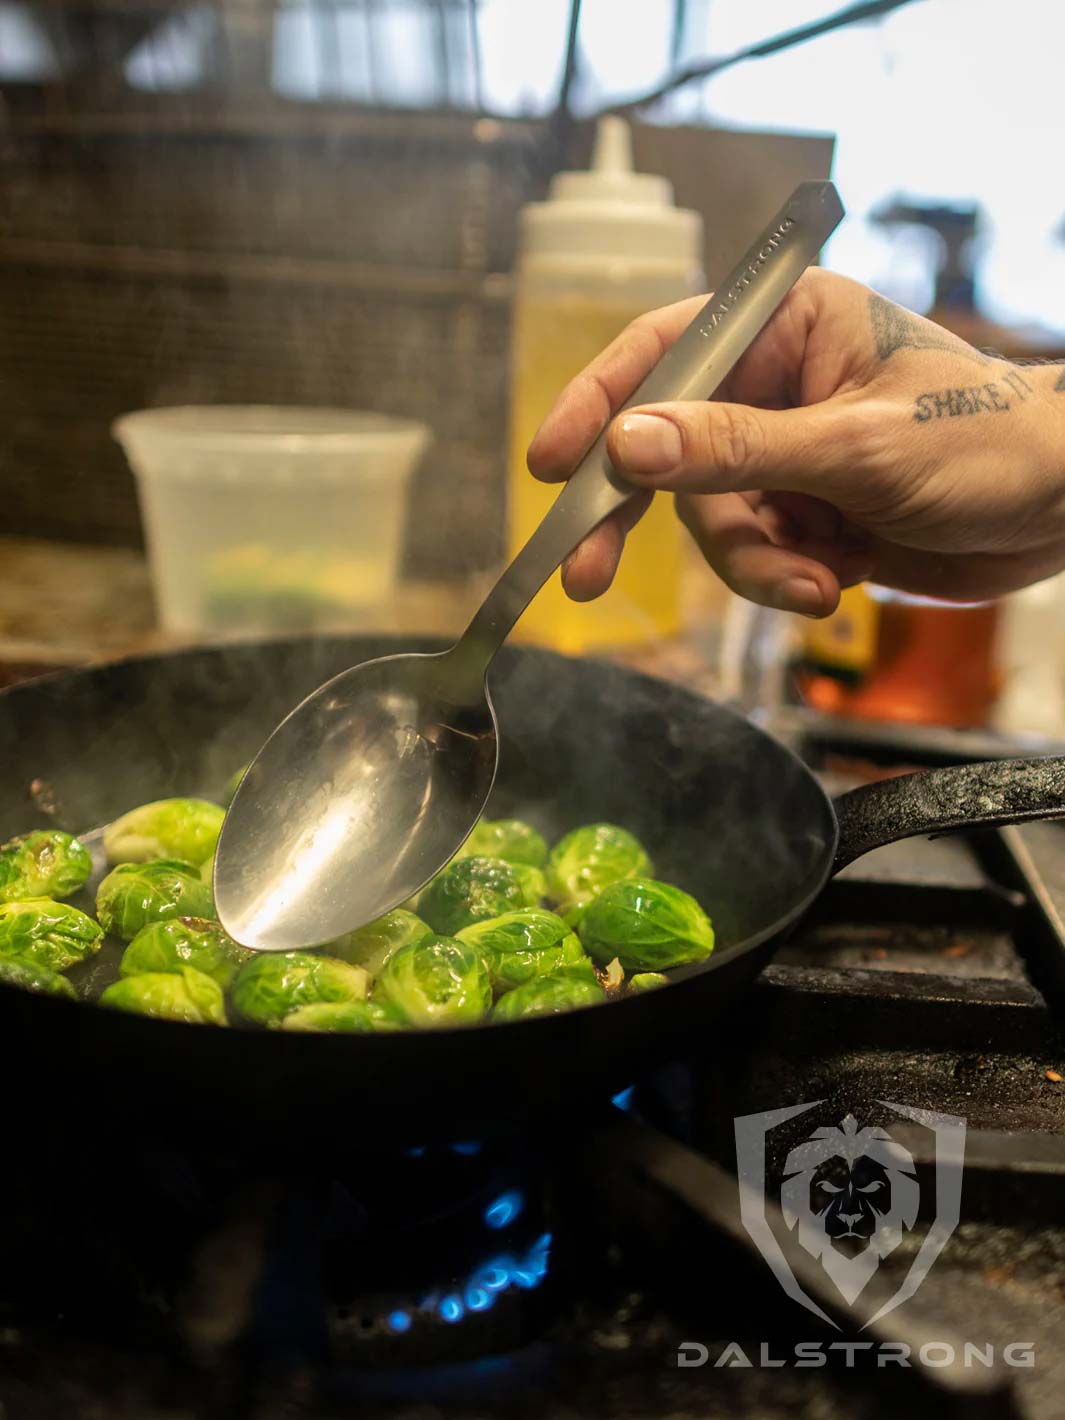 Dalstrong professional chef tasting and plating spoon on top of a brussel sprouts.